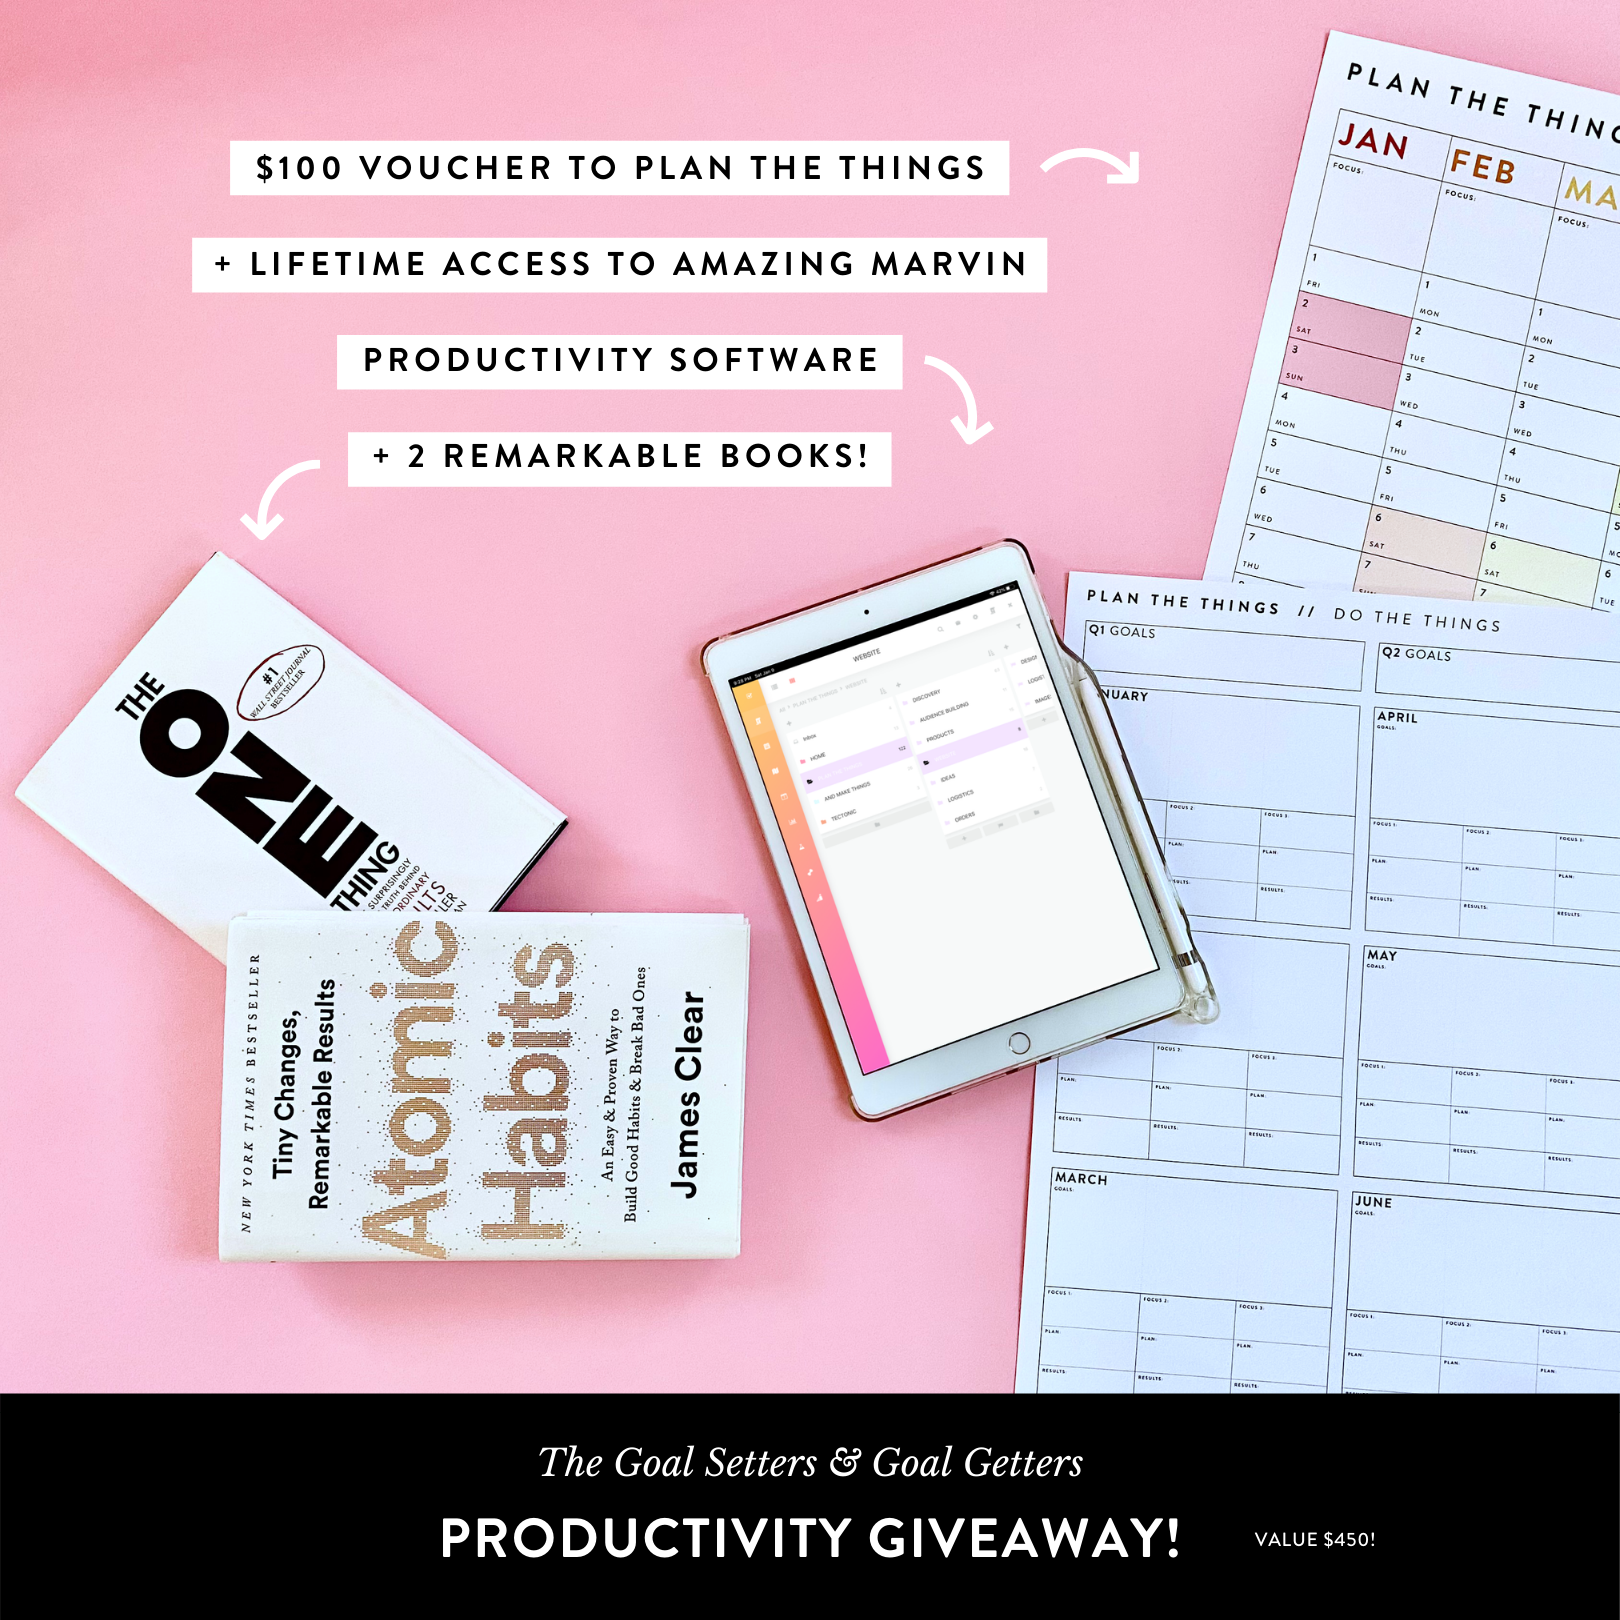 THE GOAL SETTERS & GOAL GETTERS PRODUCTIVITY GIVEAWAY!